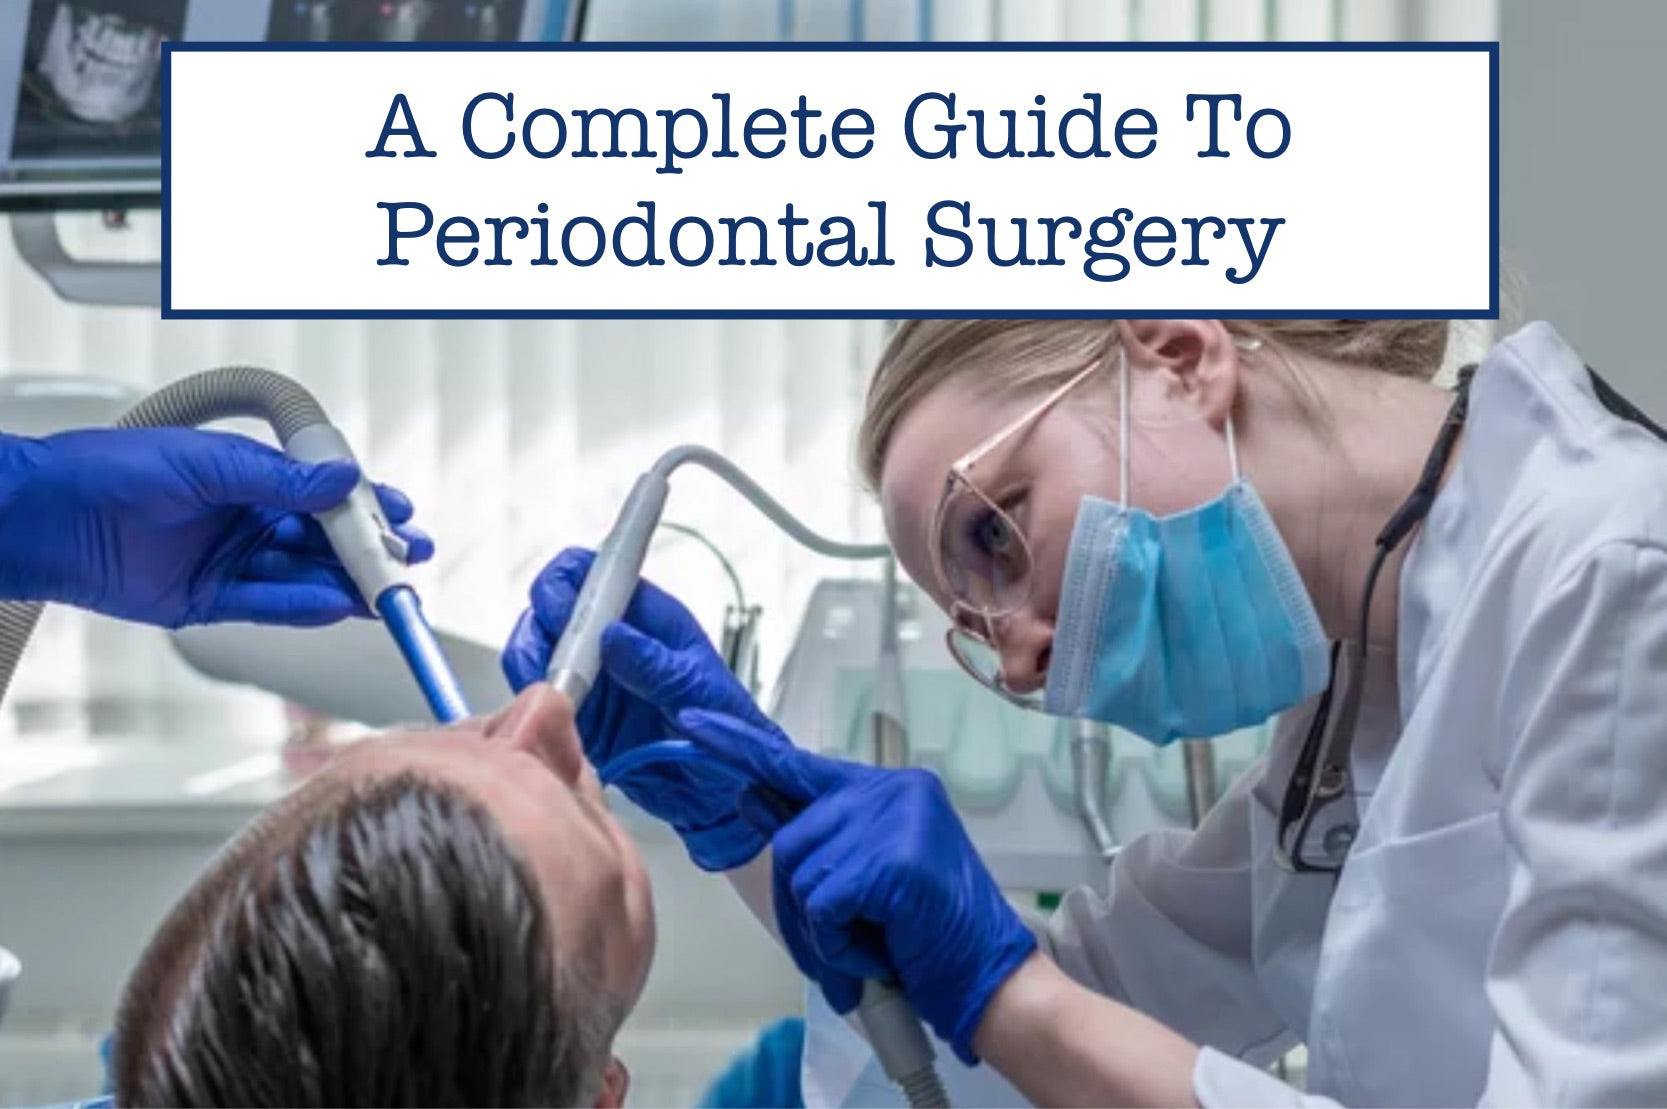 A Complete Guide To Periodontal Surgery